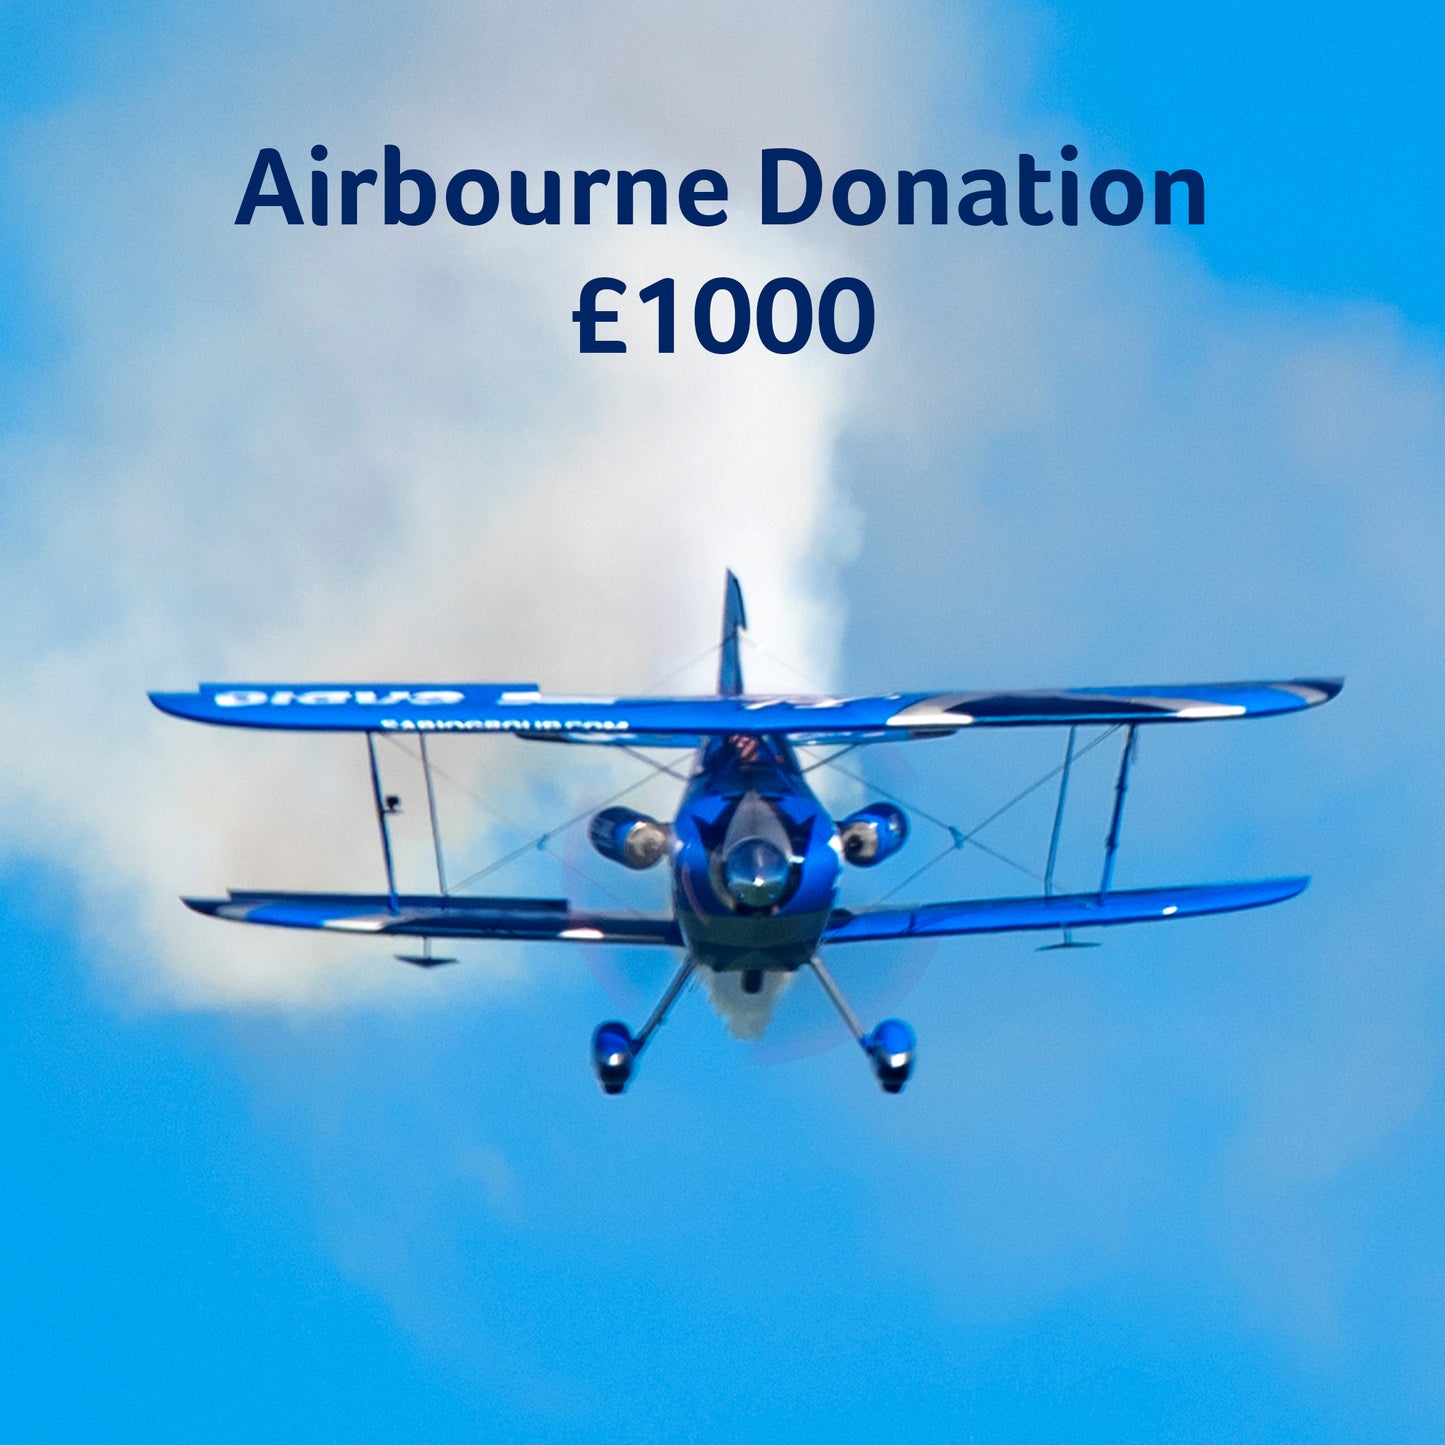 Airbourne Donation - £1000